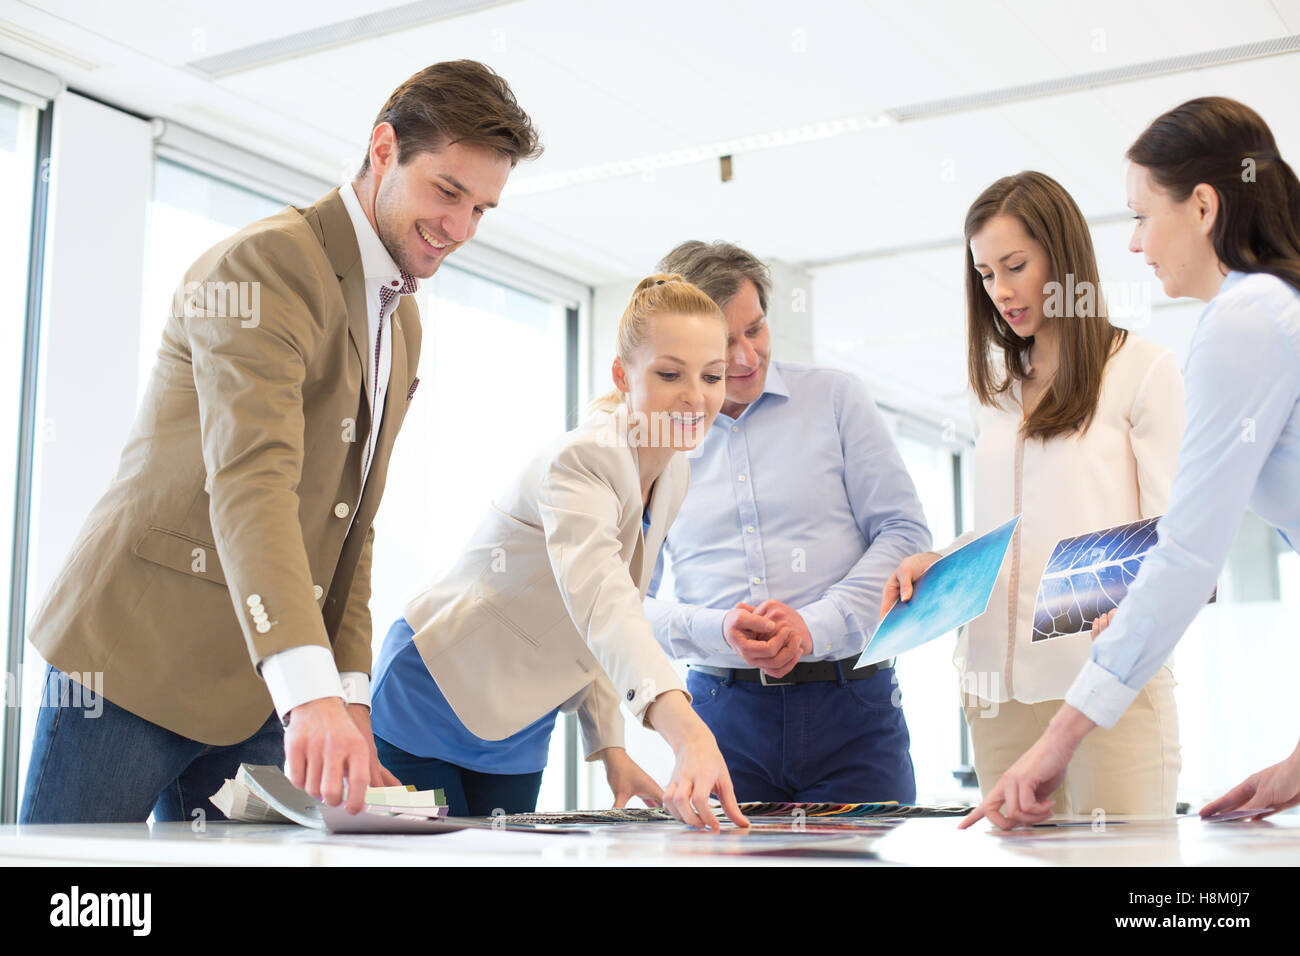 Business people having discussion at table in new office Stock Photo